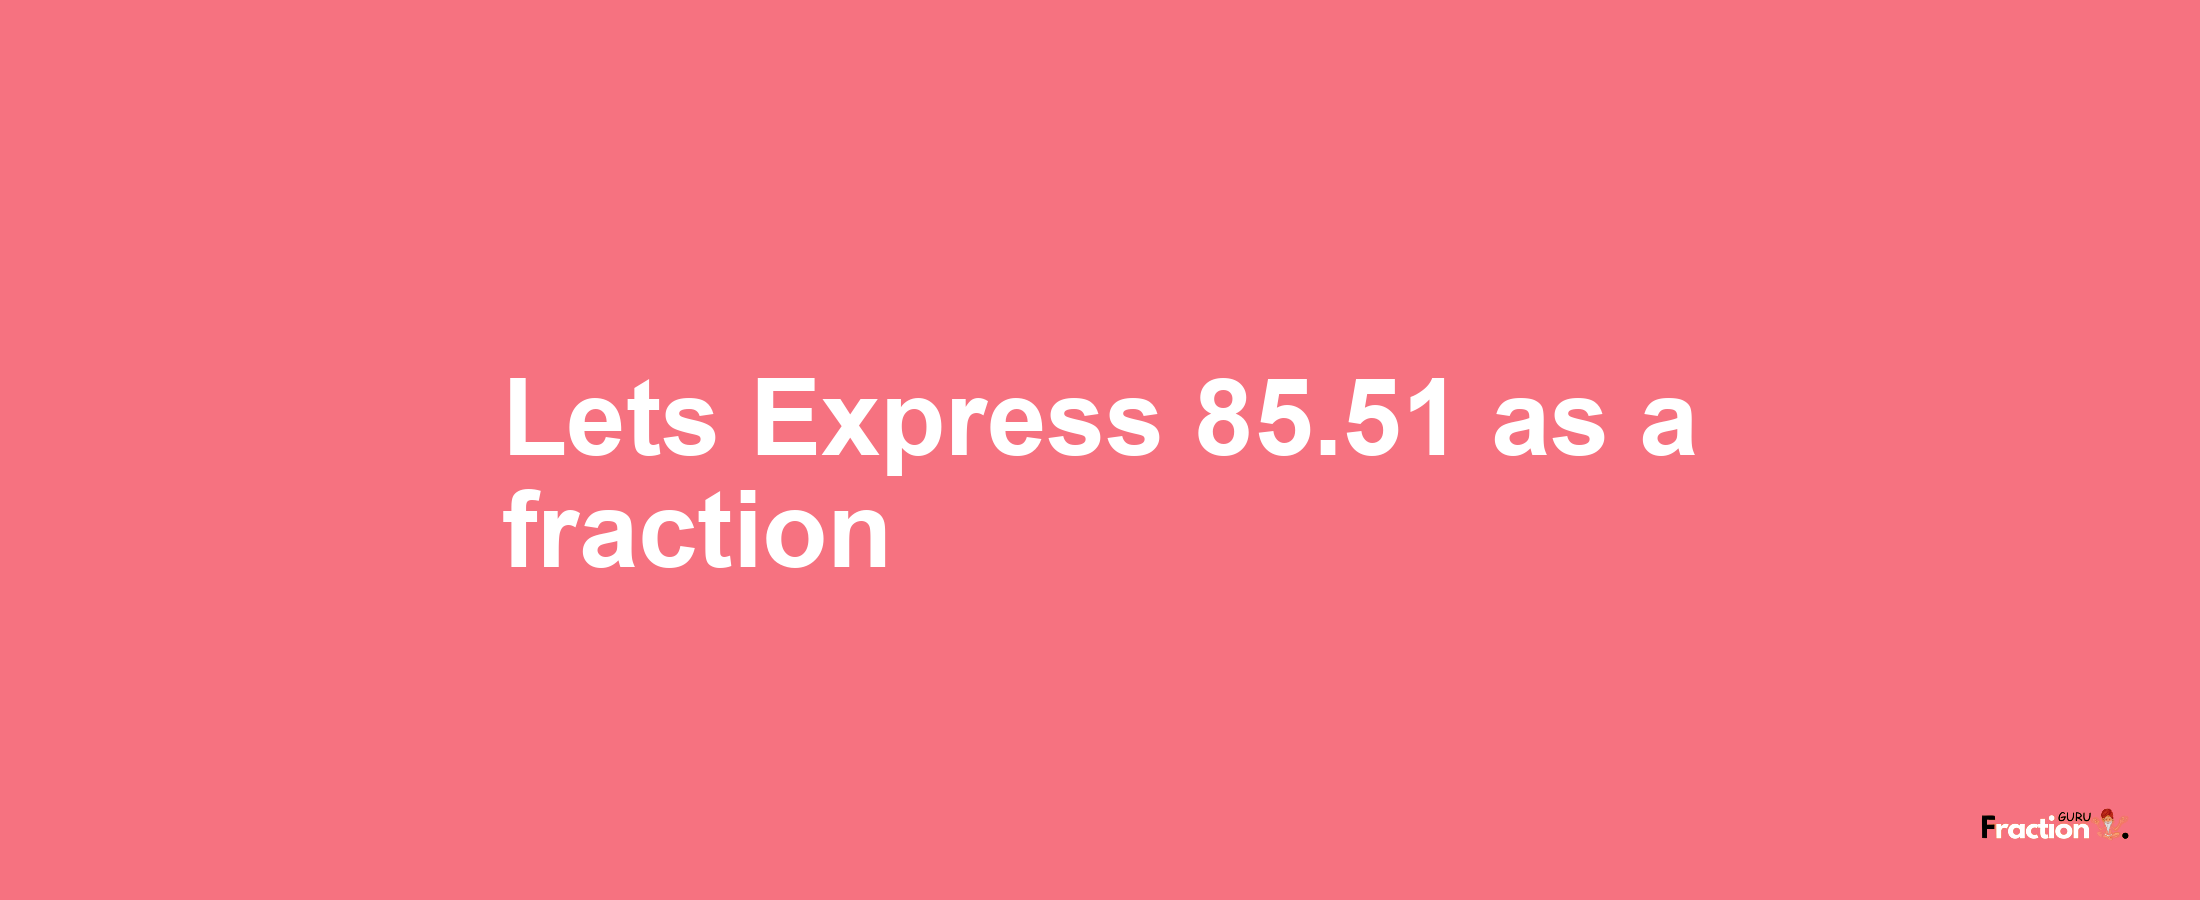 Lets Express 85.51 as afraction